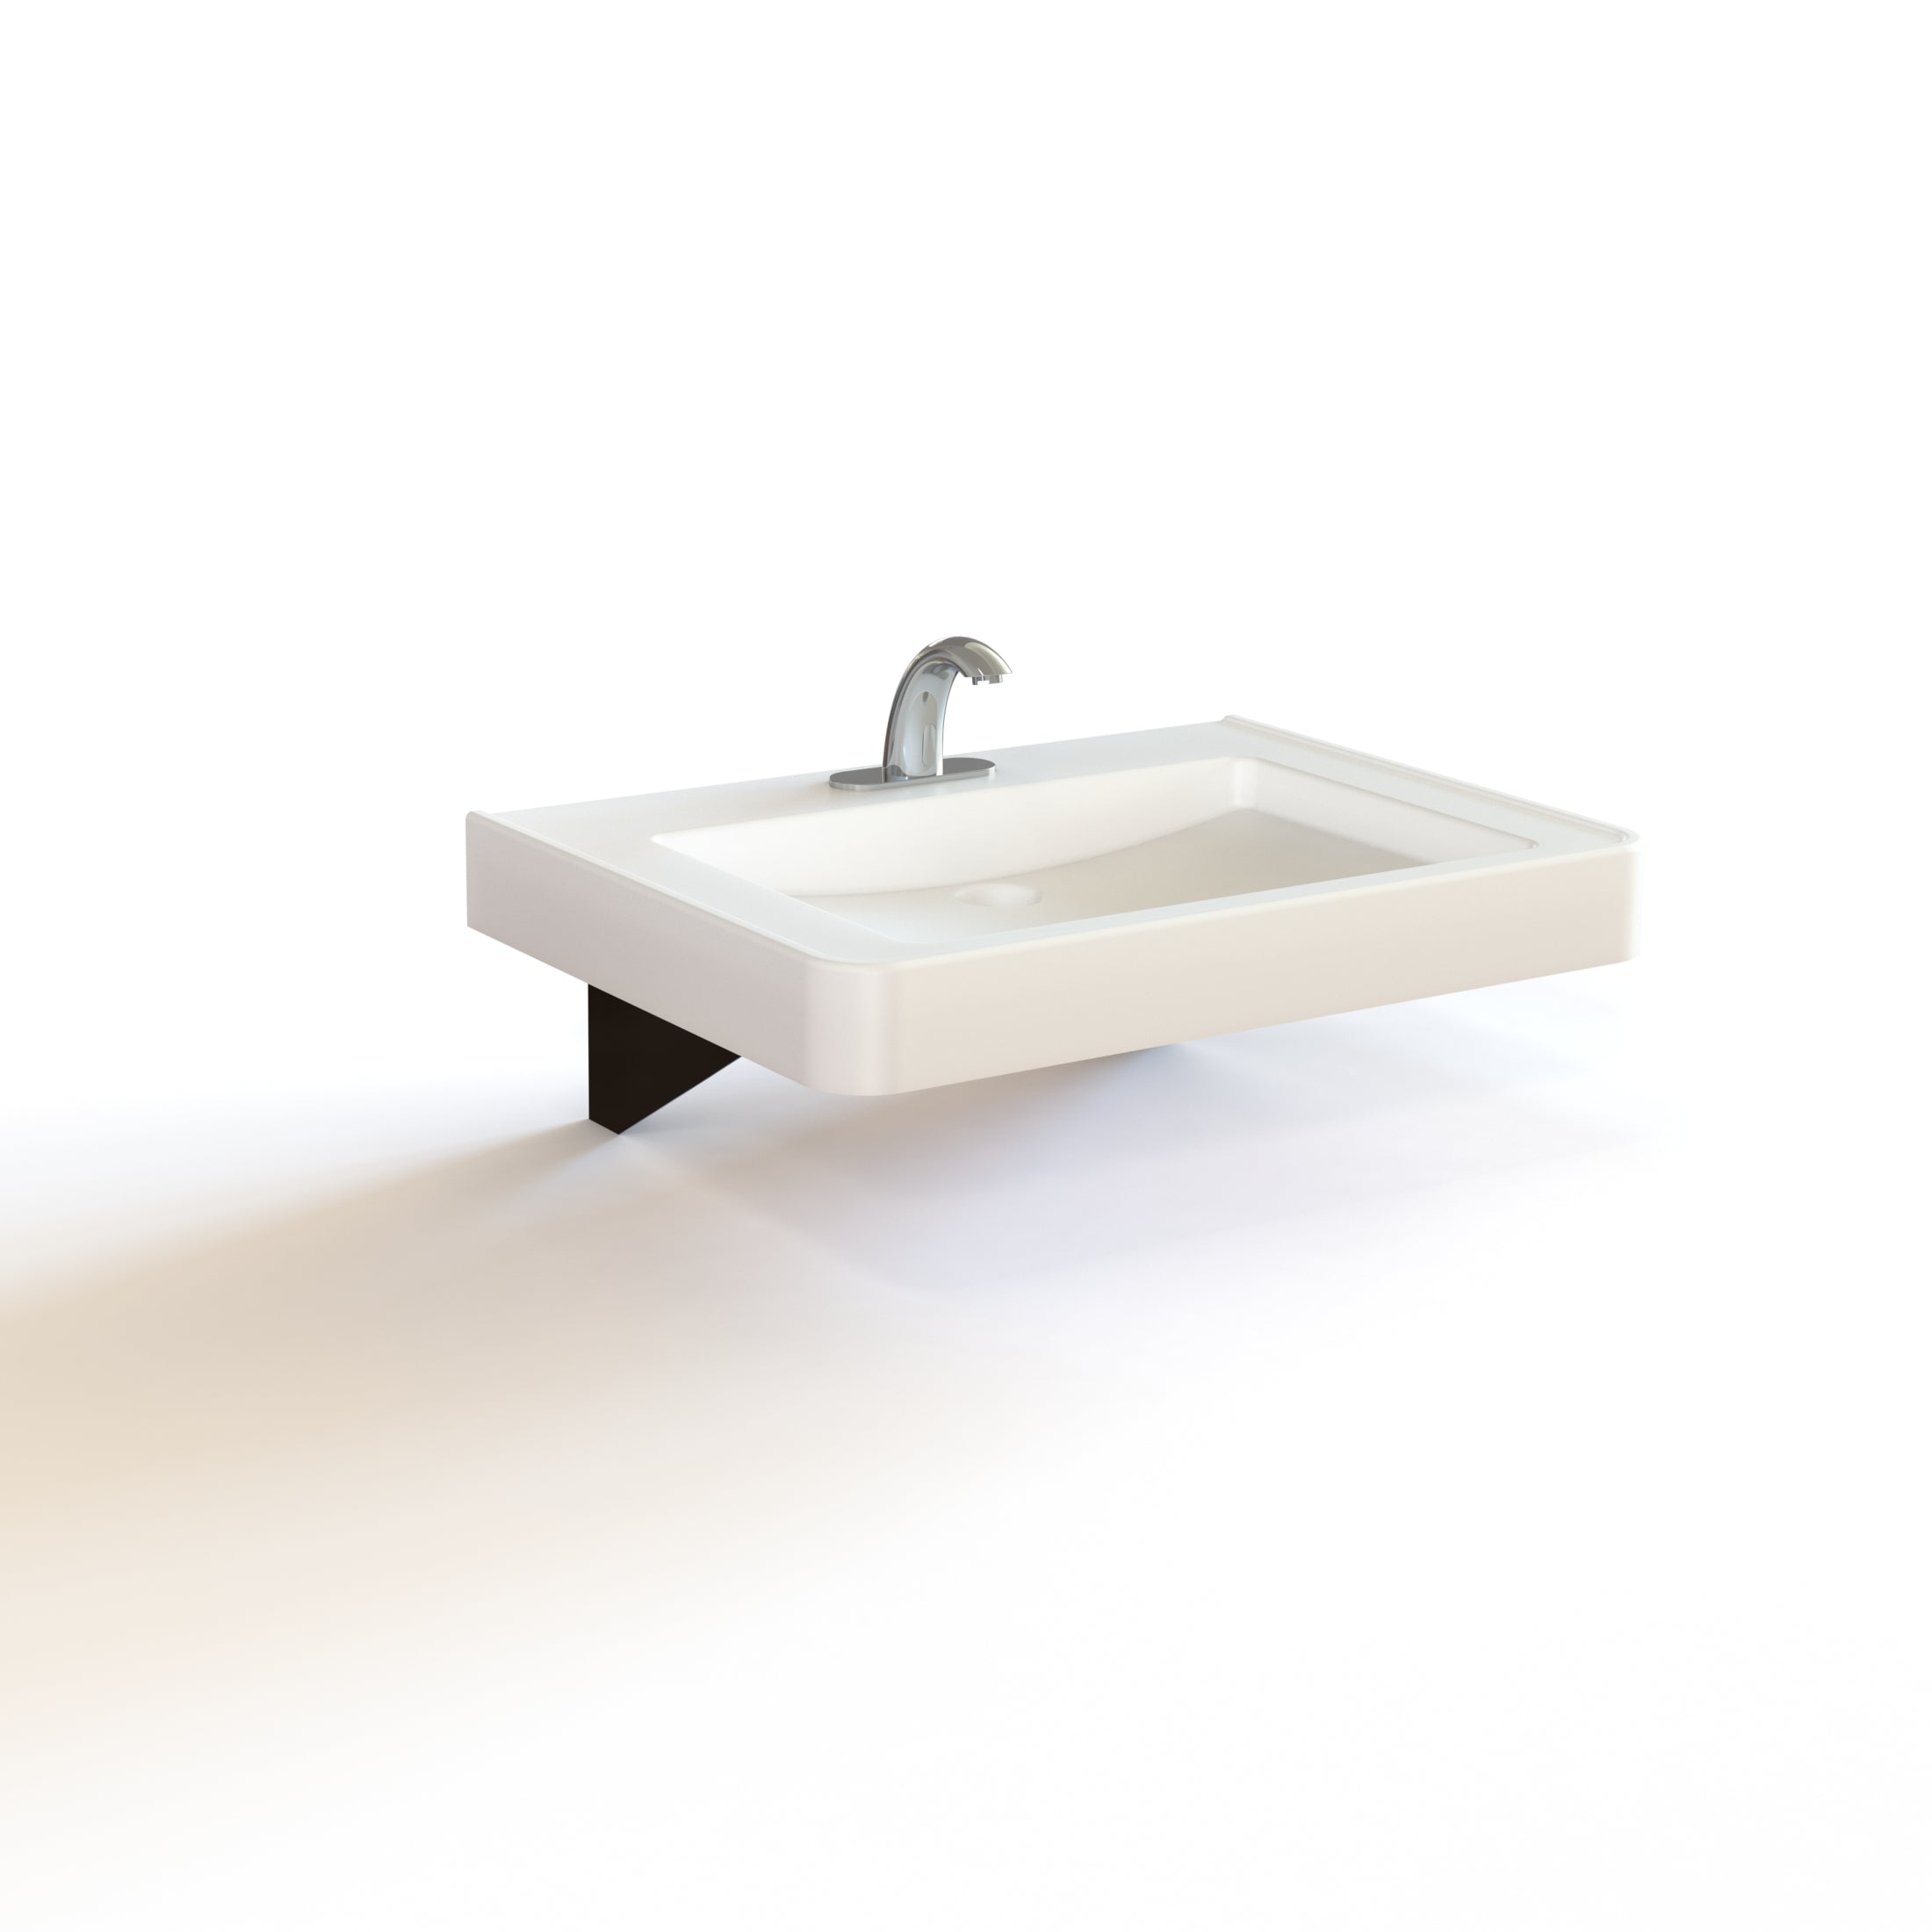 SL01 - Streamlav Legacy Single User Solid Surface Lavatory System for Public Restrooms